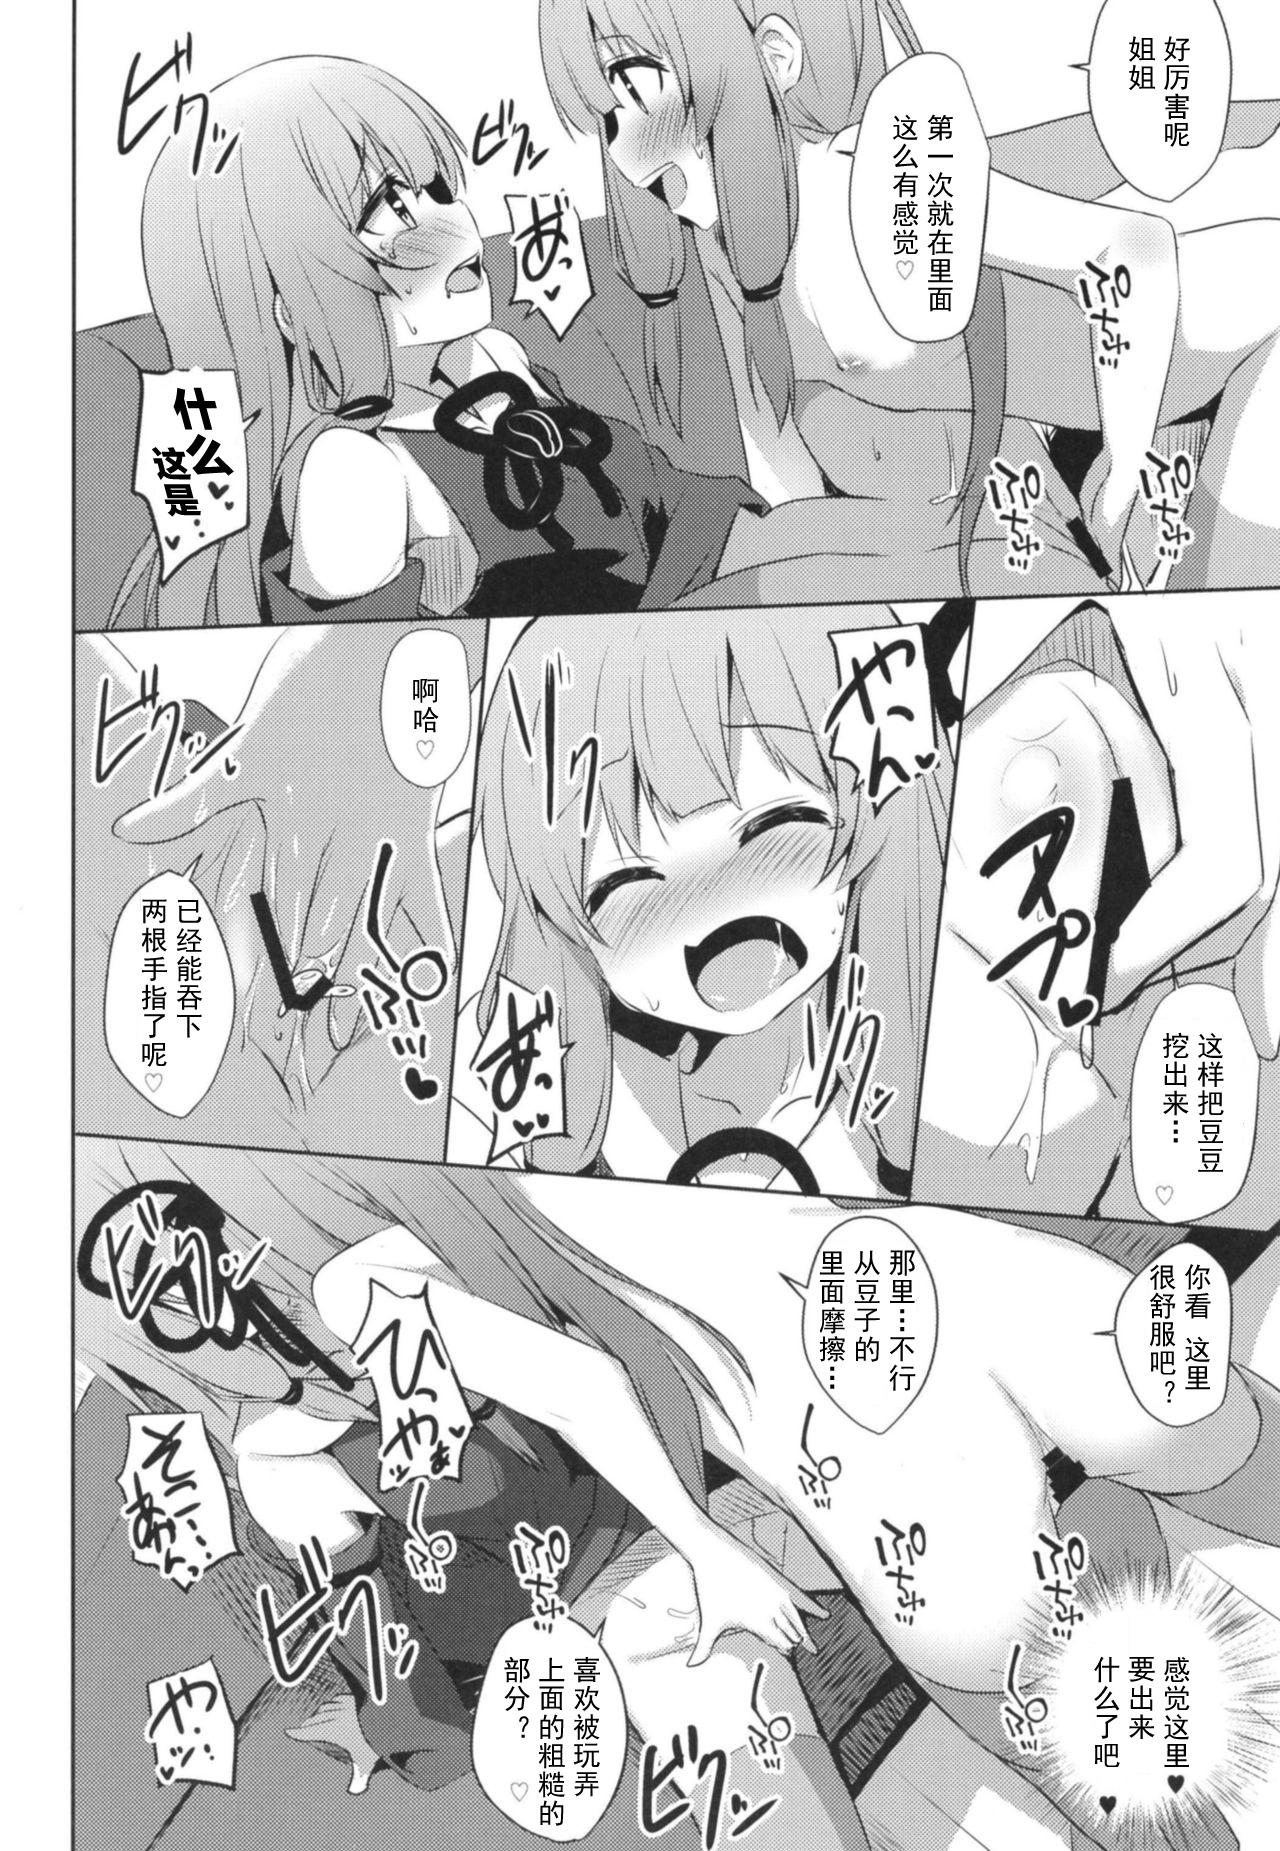 Family Taboo [Milk Pudding (Jamcy)] Akane-chan Challenge! 4-kaime (VOICEROID) [Chinese] [古早个人汉化] [Digital] - Voiceroid Orgy - Page 8